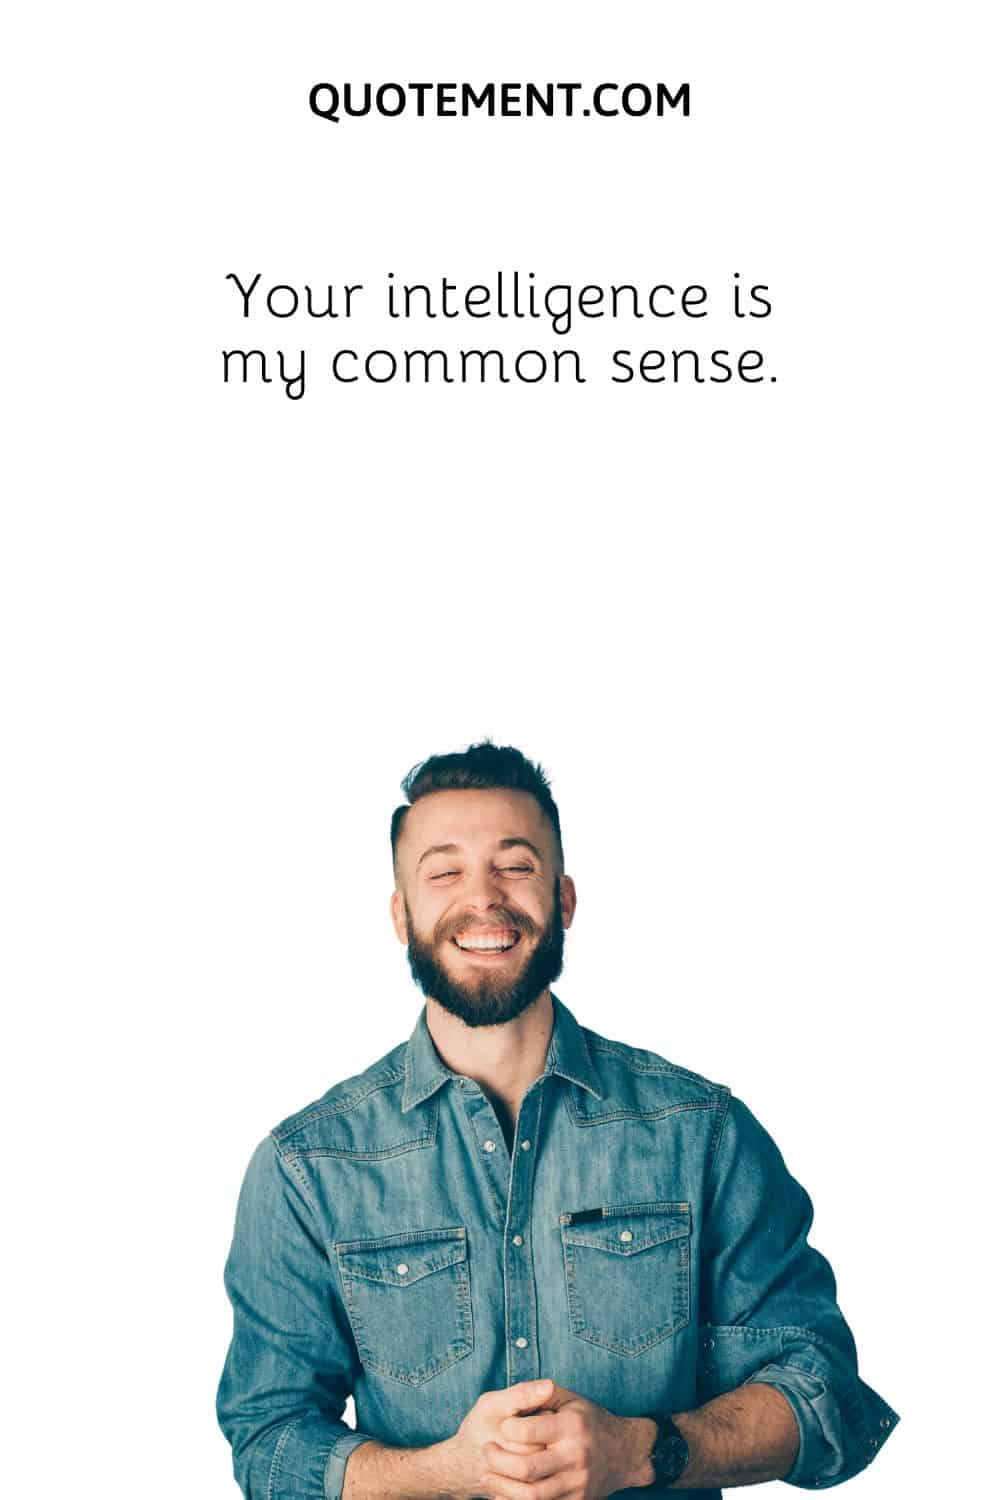 Your intelligence is my common sense